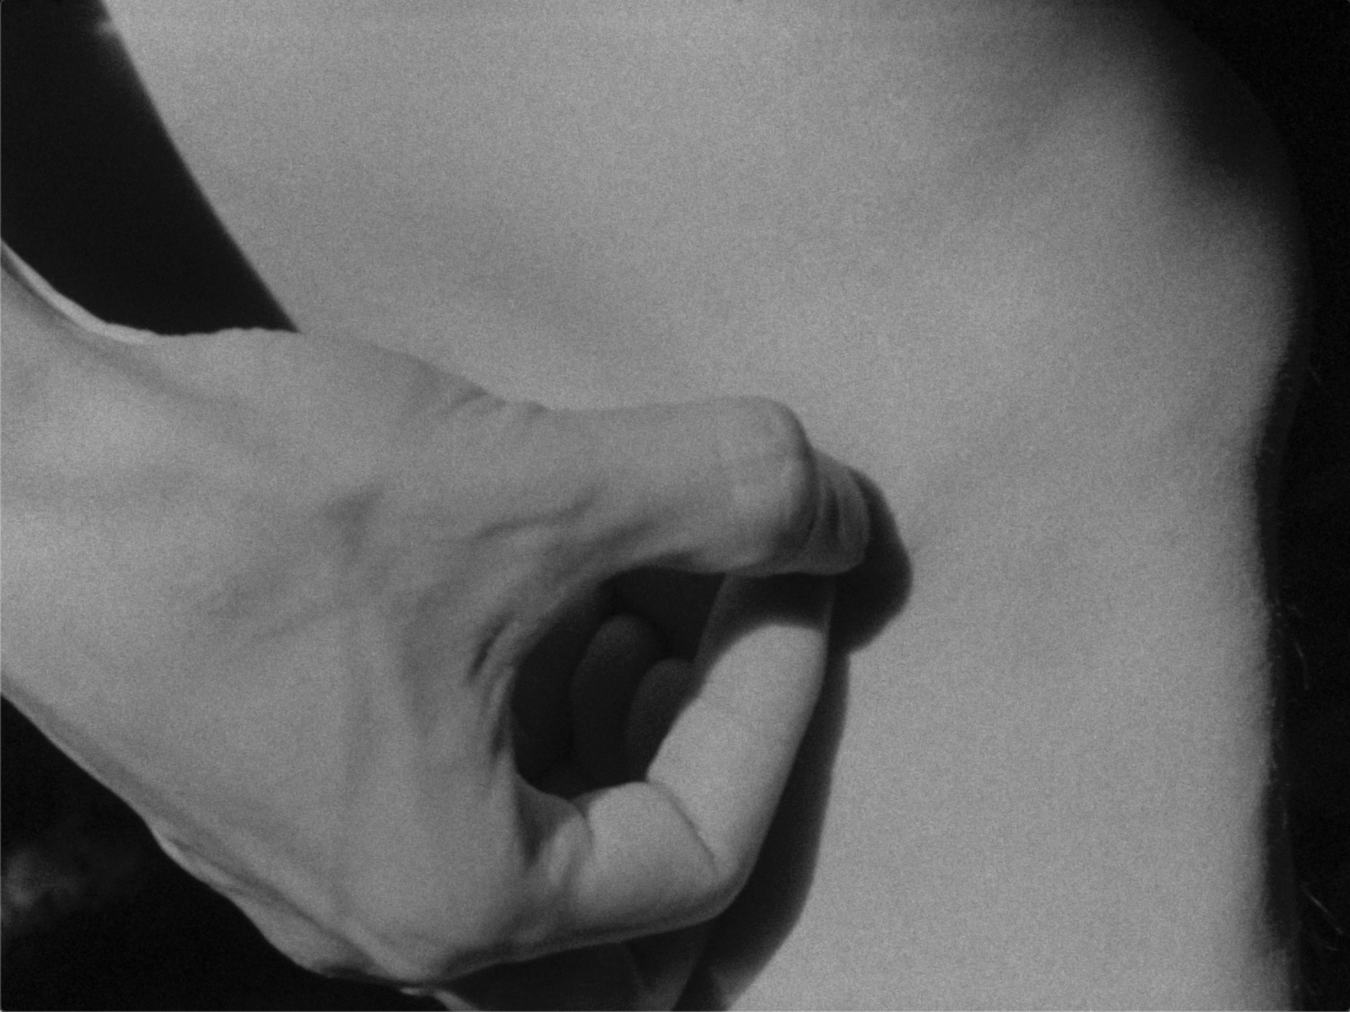 Image: Peng Zuqiang, Sight Leak (still), 2022. 12:15 mins, single channel, 16mm and Super 8mm film transferred to HD video. Image courtesy of the artist and Antenna Space, Shanghai.